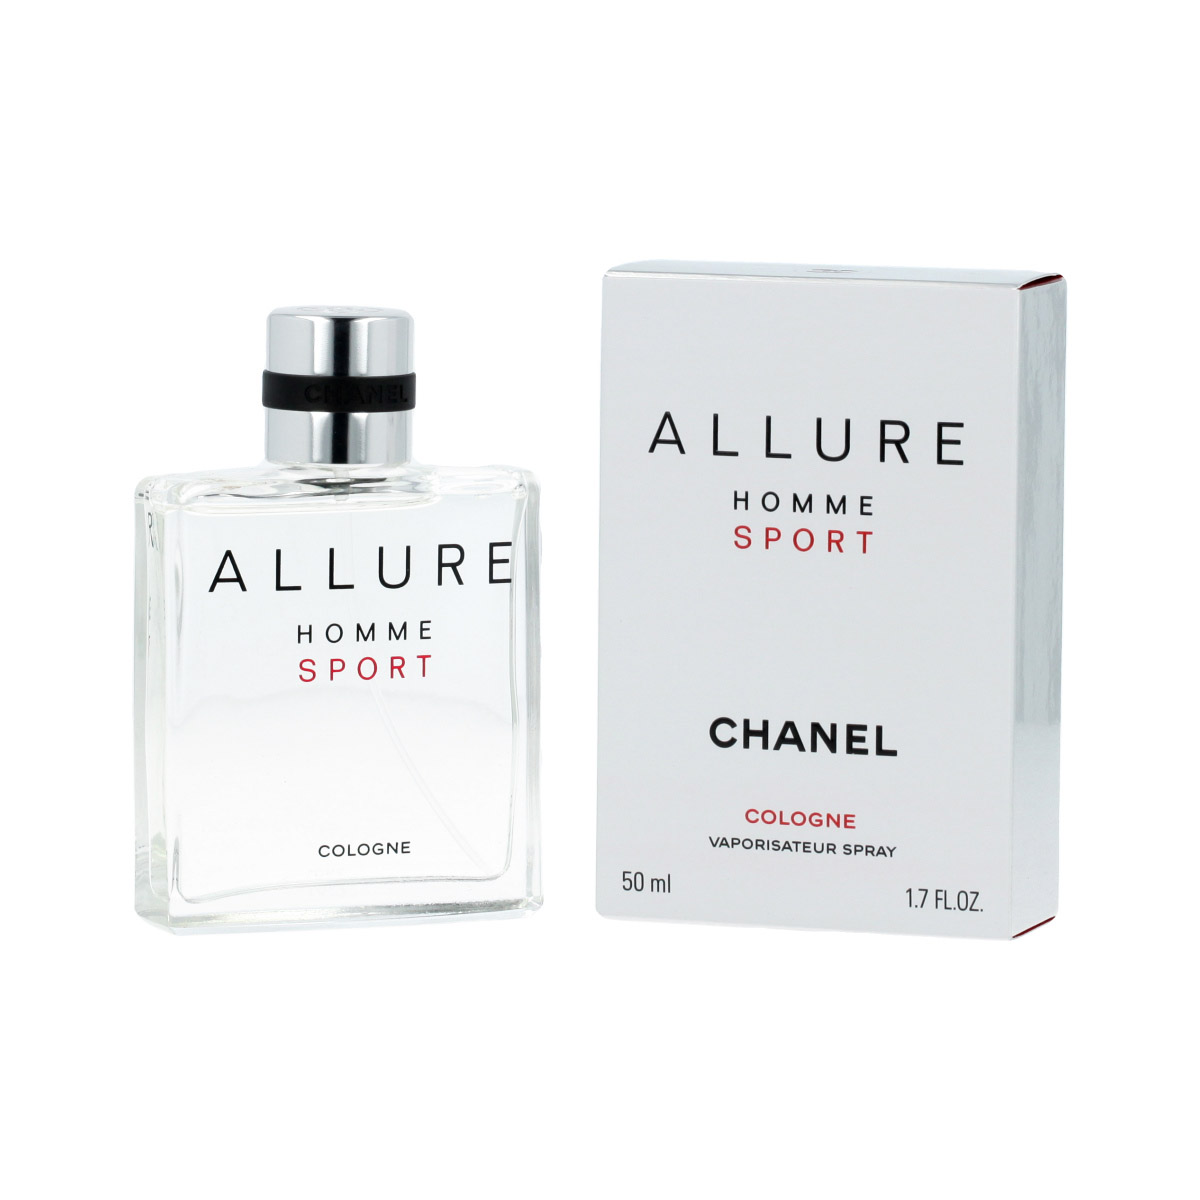 Allure sport cologne. Chanel Allure homme Sport Cologne. Chanel homme Sport Cologne. Allure homme Sport Cologne EDT 50ml. Chanel Allure Sport Cologne.